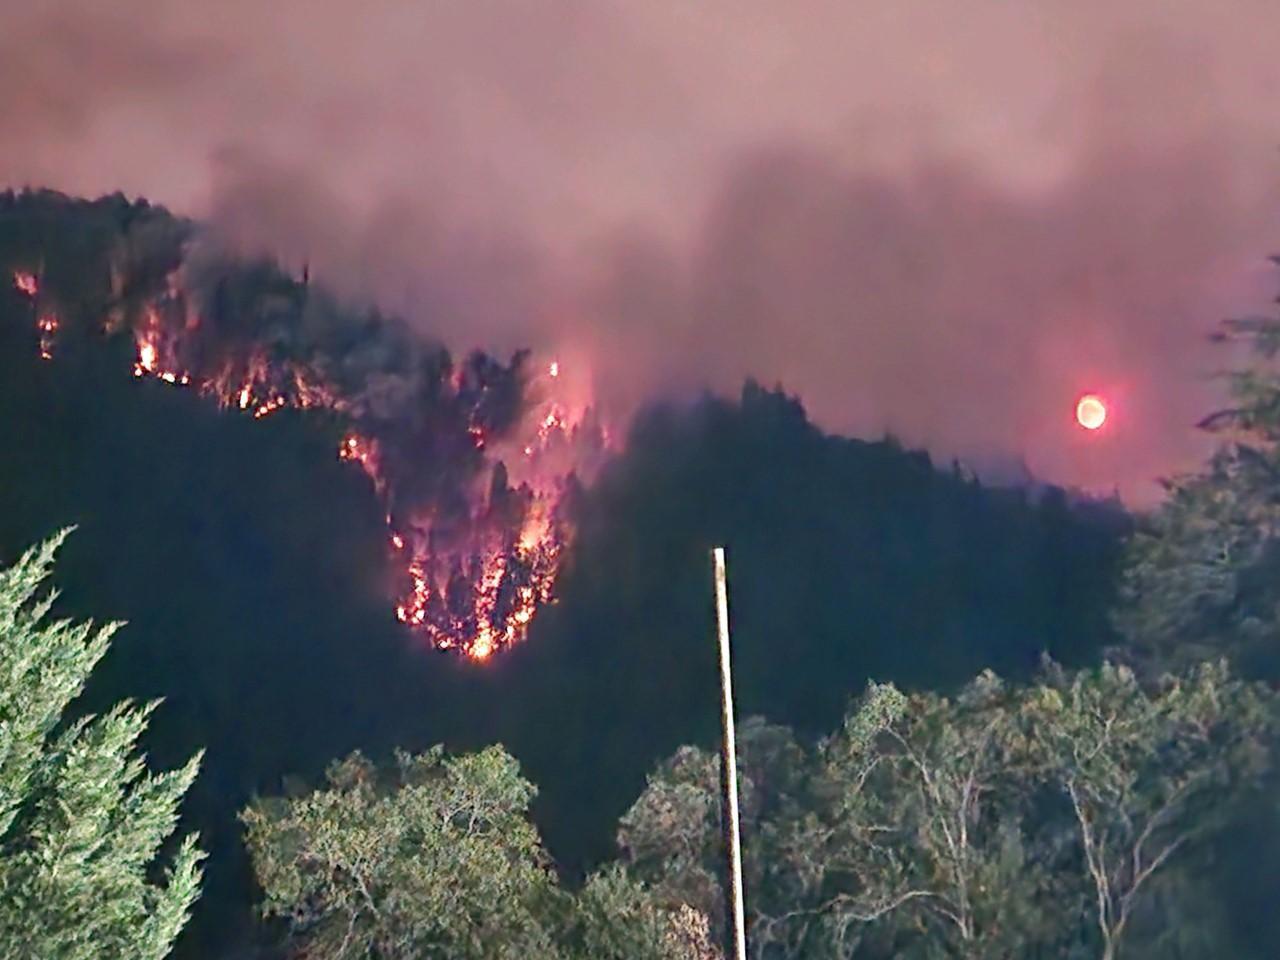 Flames on the hillside at night